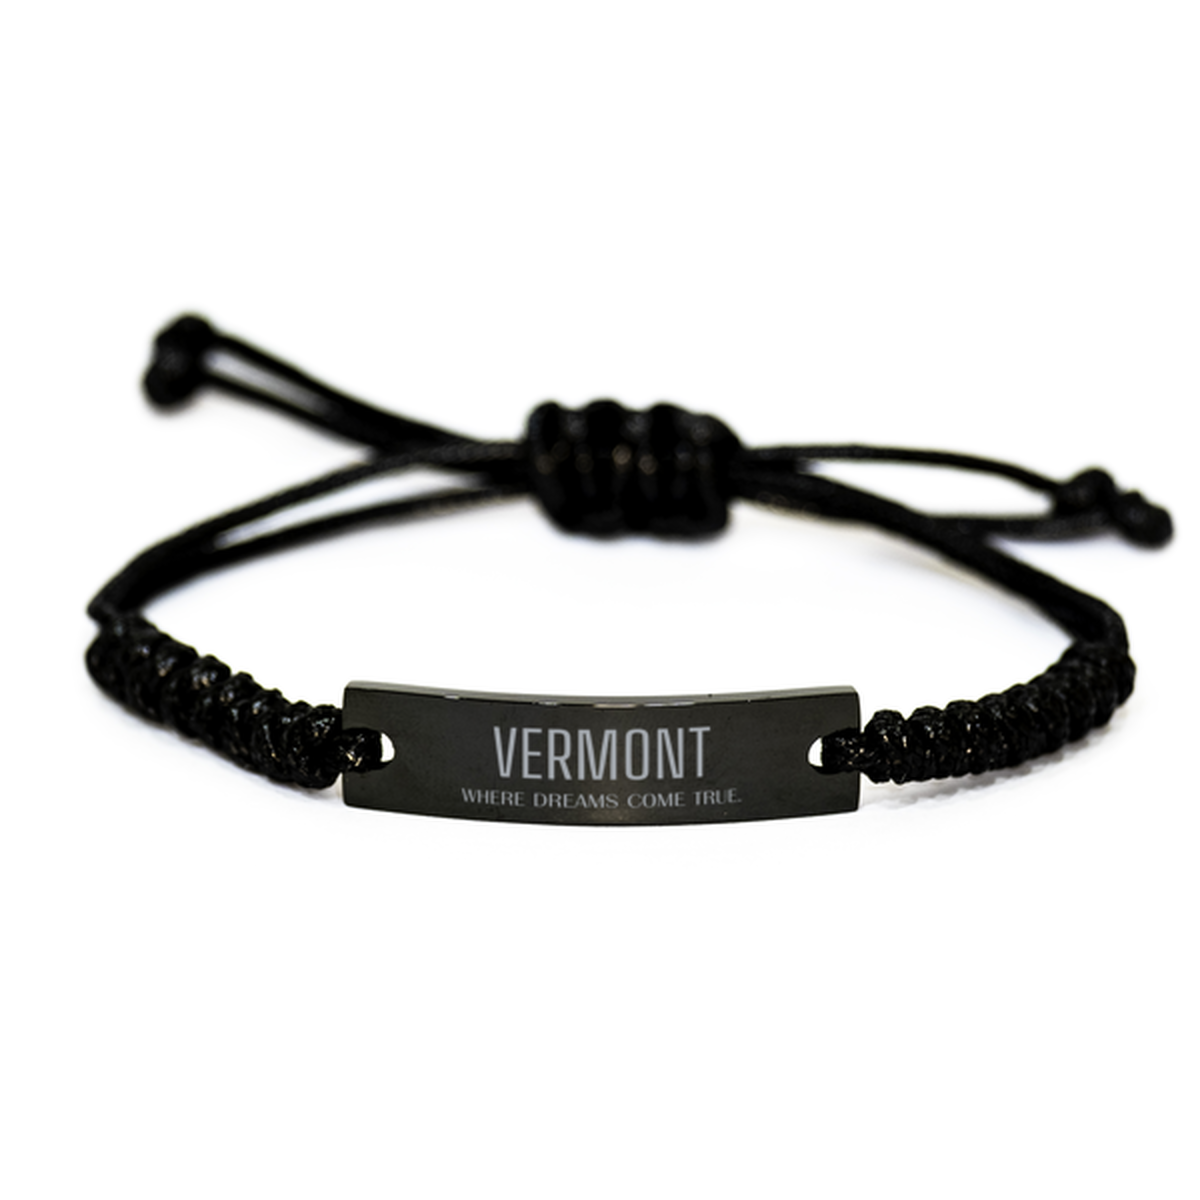 Love Vermont State Black Rope Bracelet, Vermont Where dreams come true, Birthday Inspirational Gifts For Vermont Men, Women, Friends